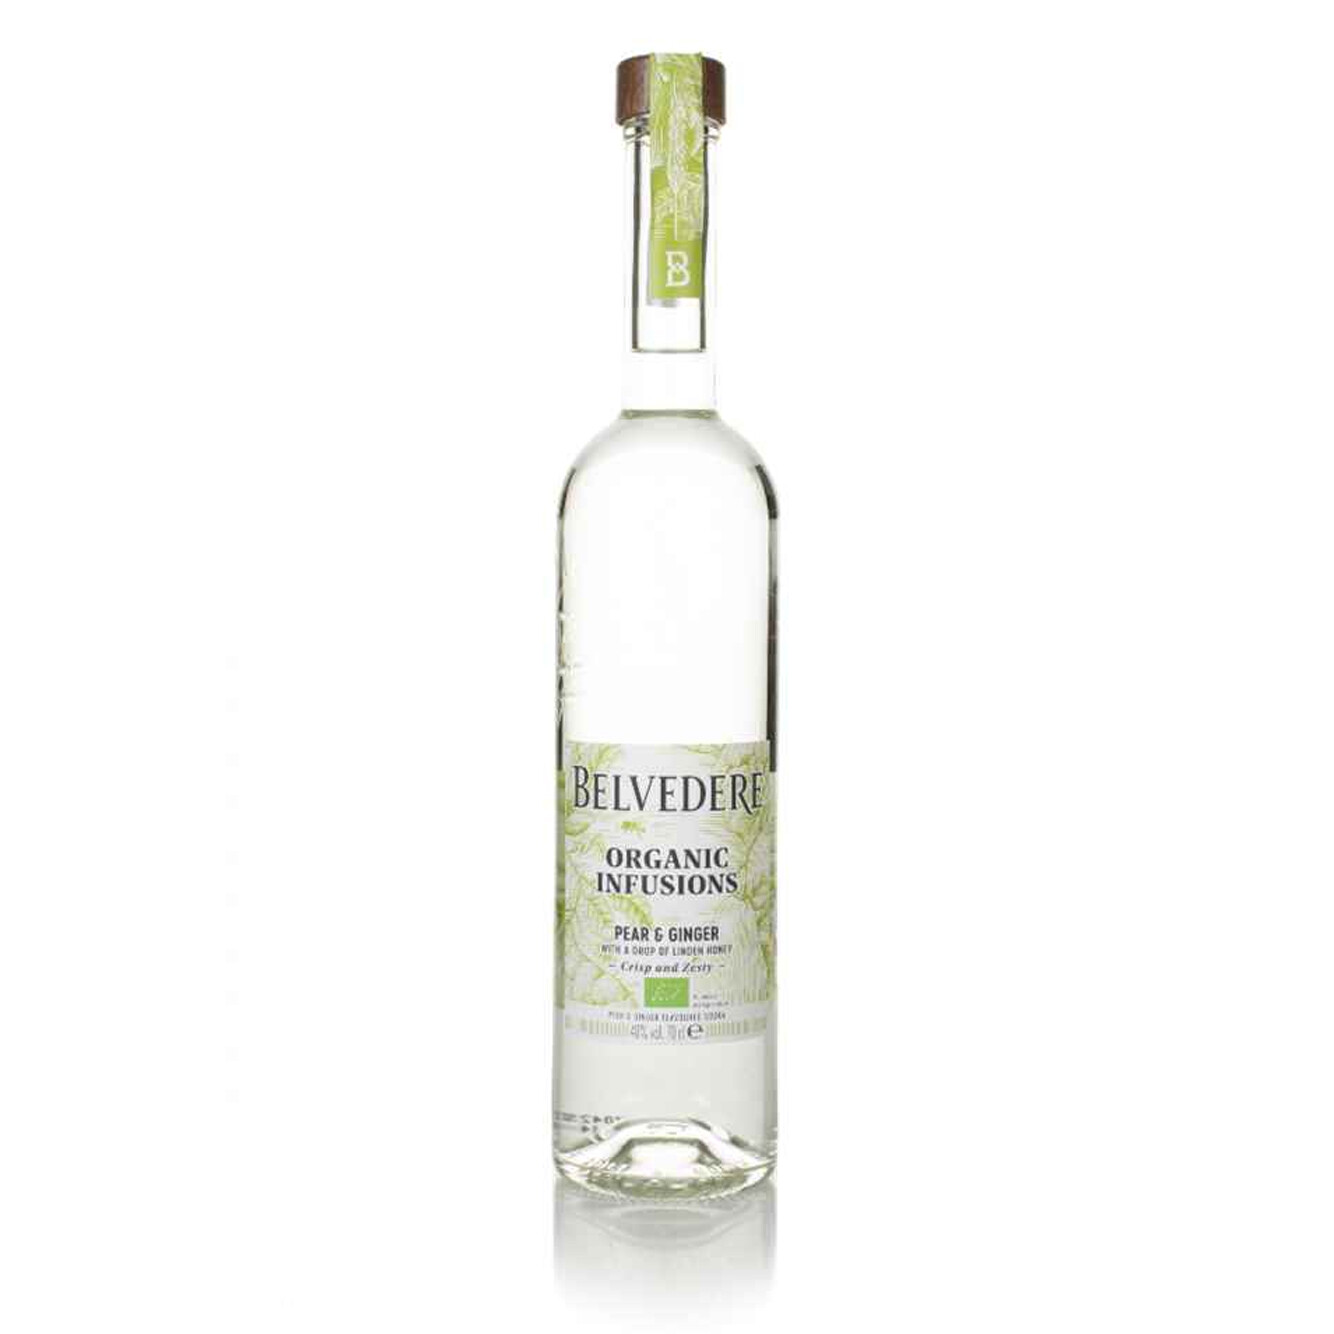 Belvedere Organic Infusions Pear and Ginger Vodka